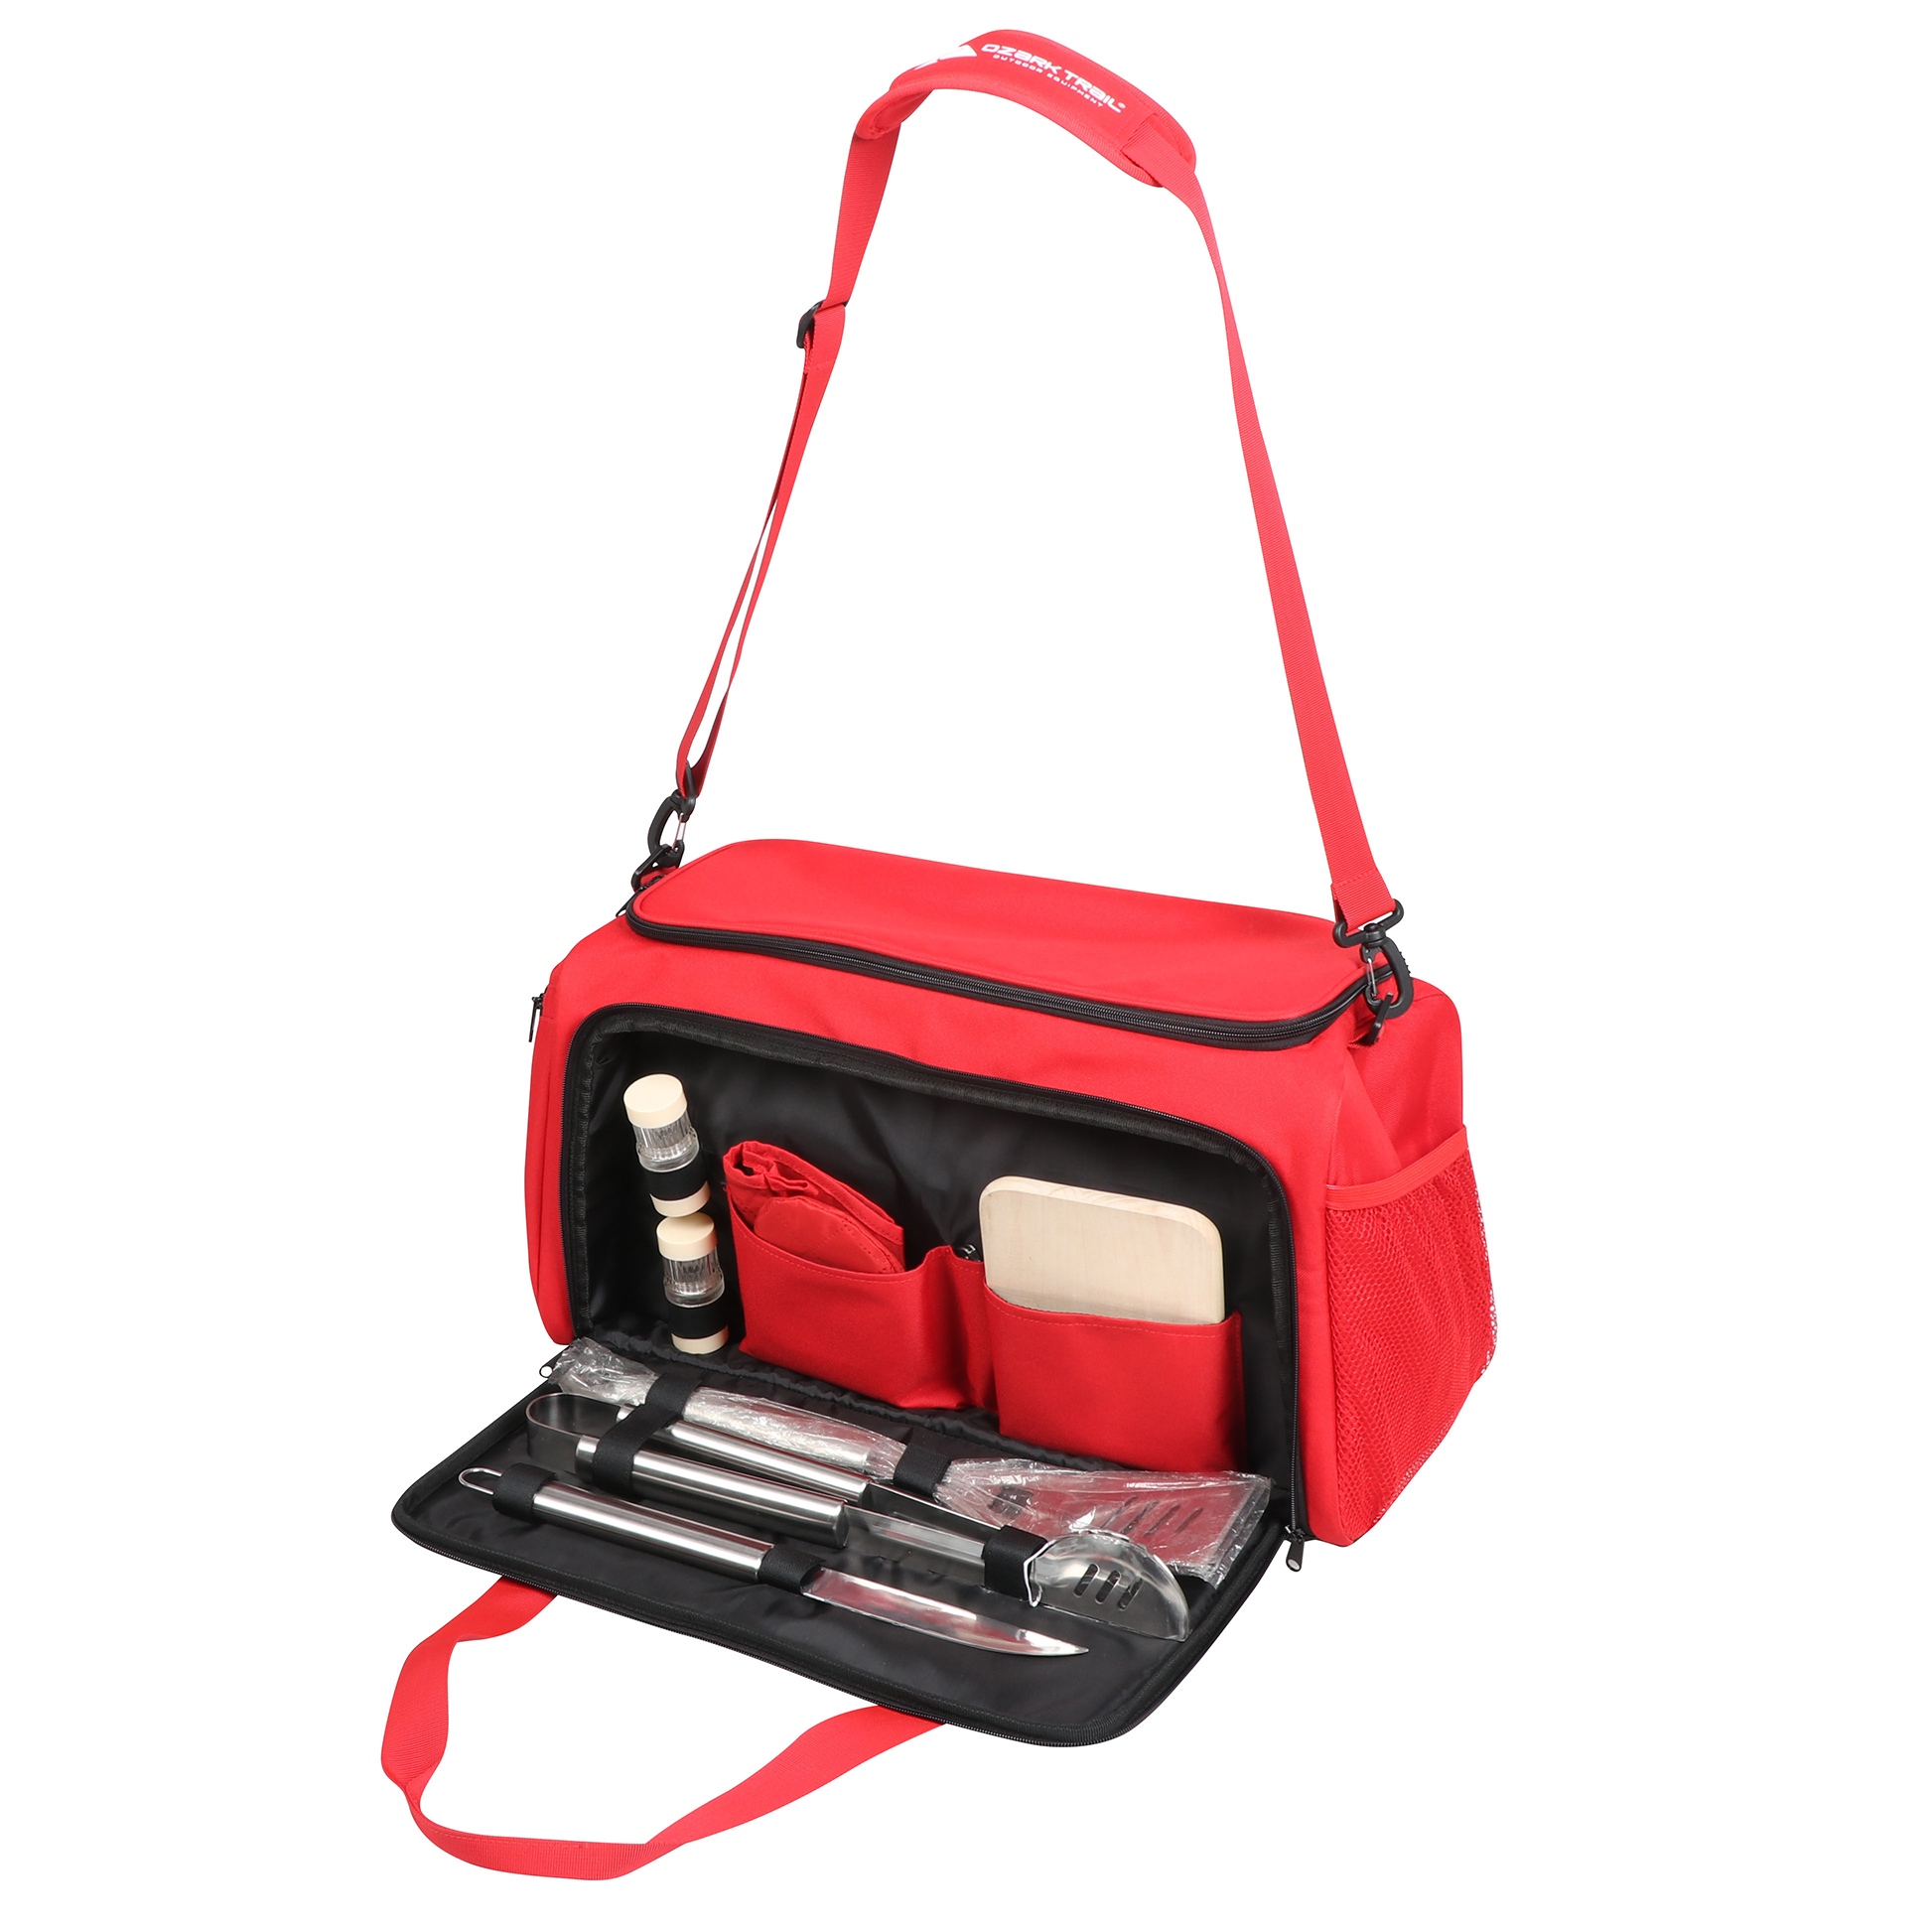 Ozark Trail Soft Sided Tailgate Cooler with Utensils, Red - image 1 of 11